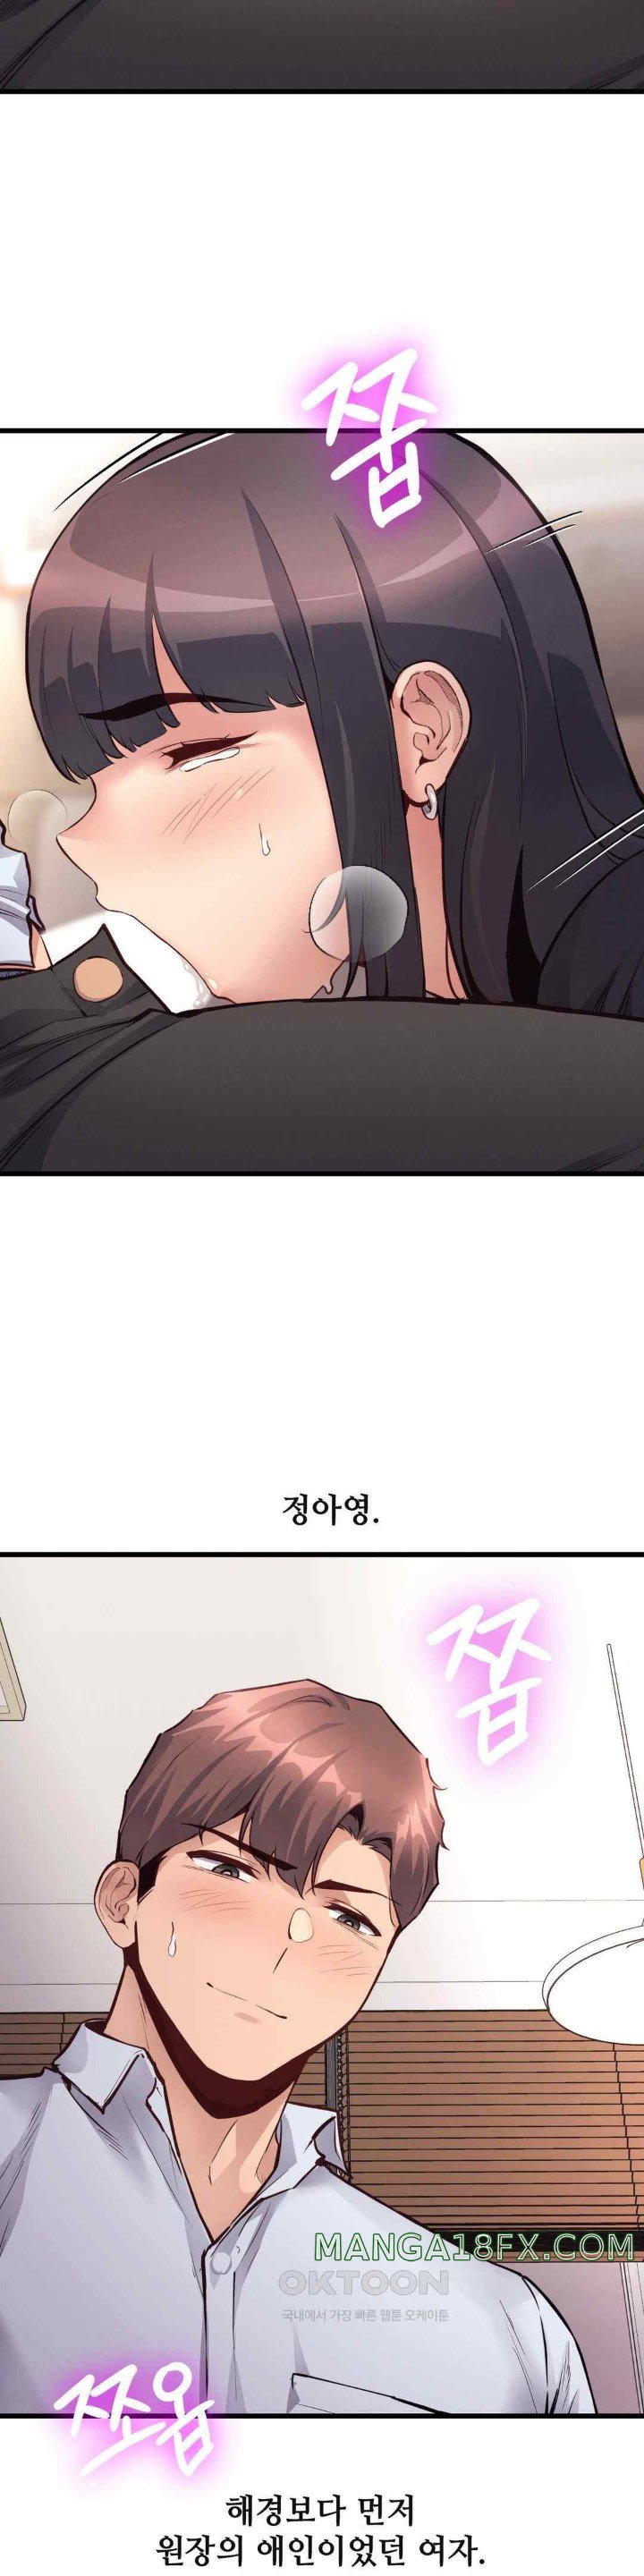 My Life is a Piece of Cake Raw Chapter 30 - Page 2